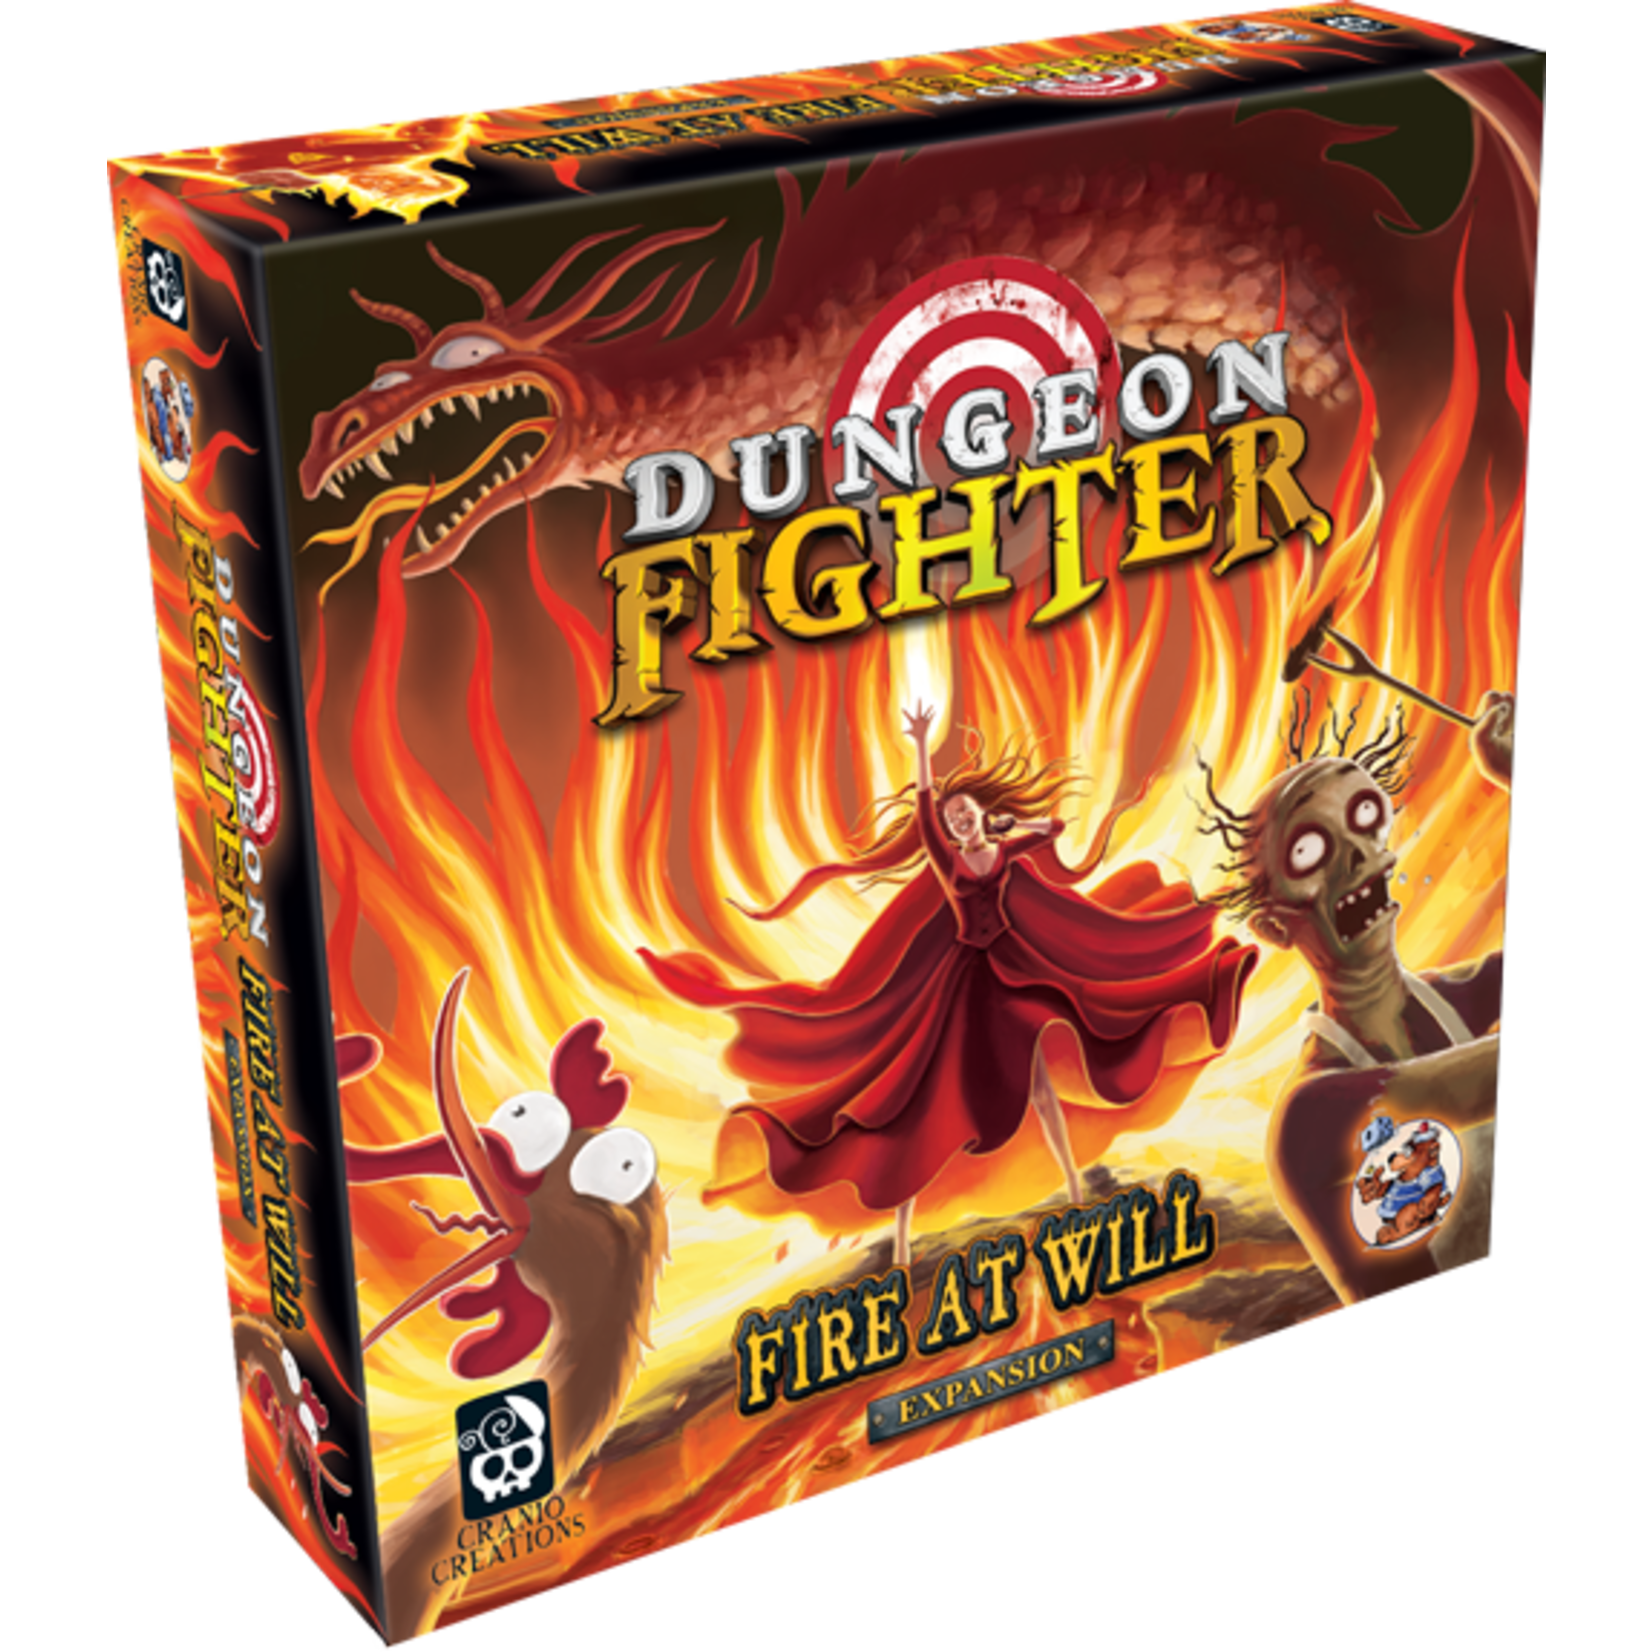 Iello Dungeon Fighter: Fire at Will Expansion